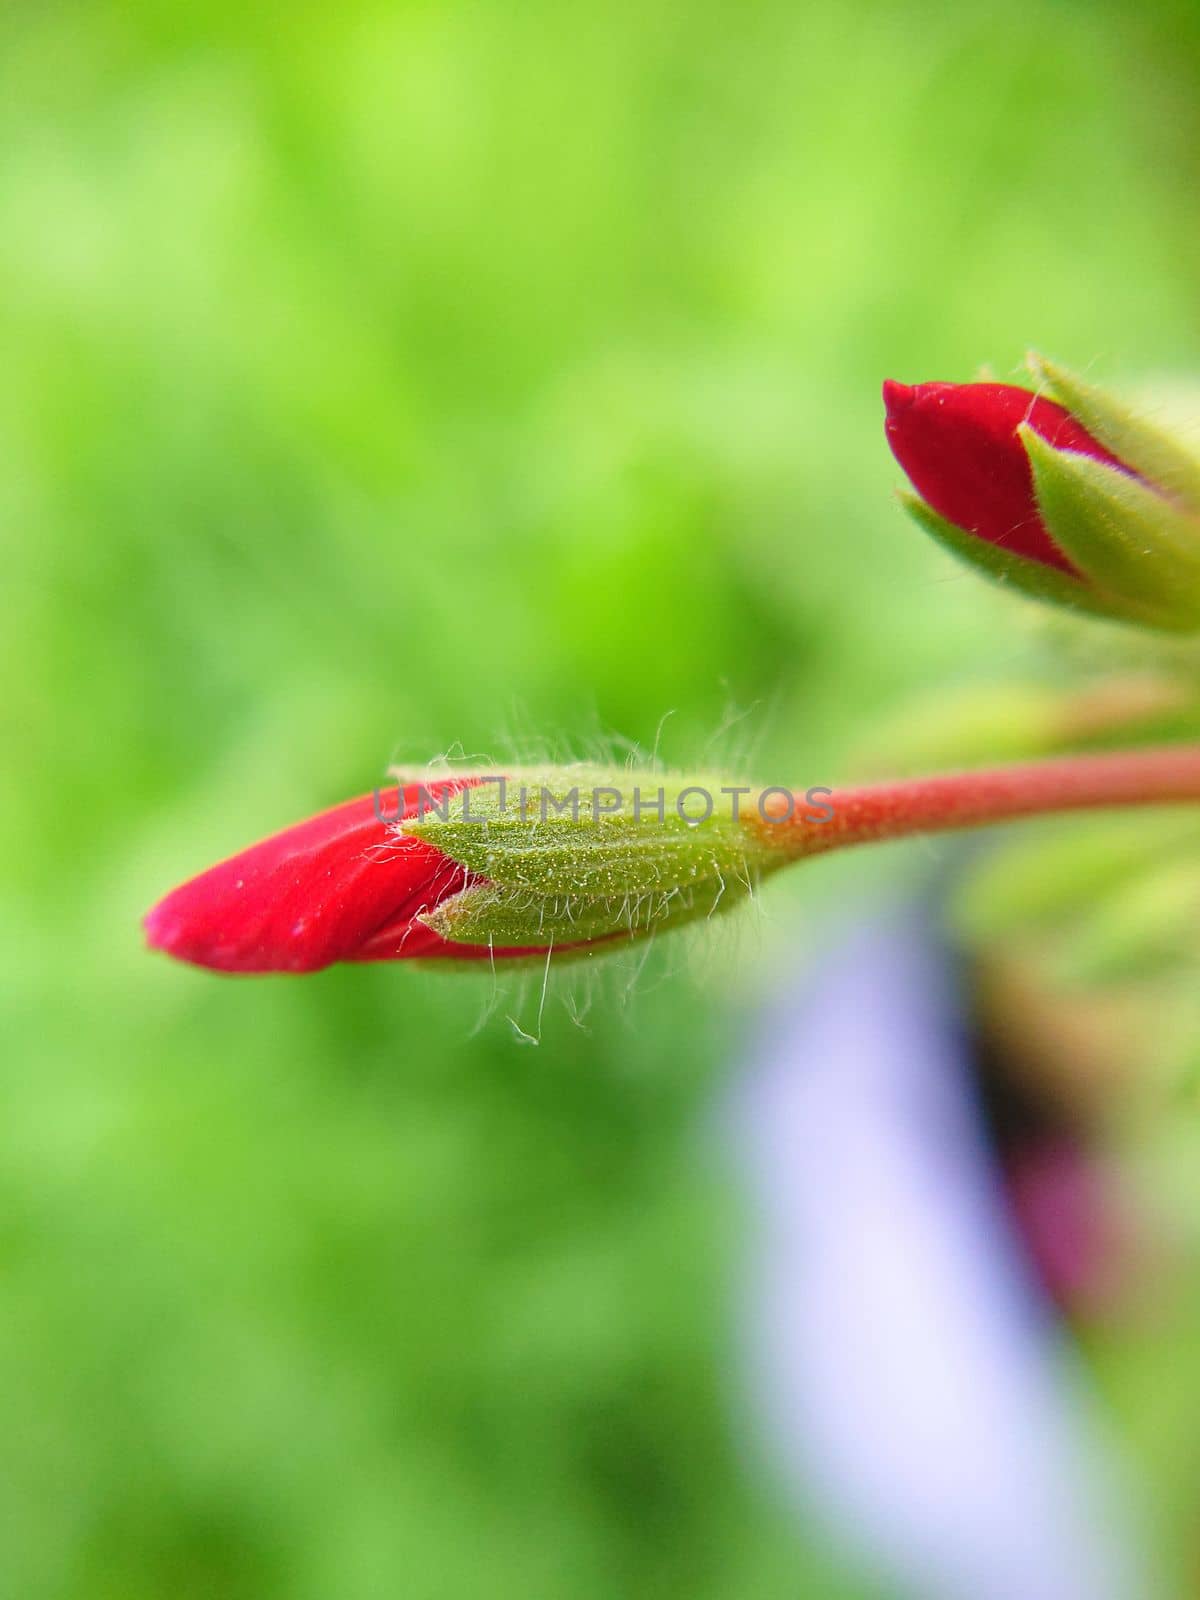 An unopened oblong bud of bright red color against the background of grass by Mastak80